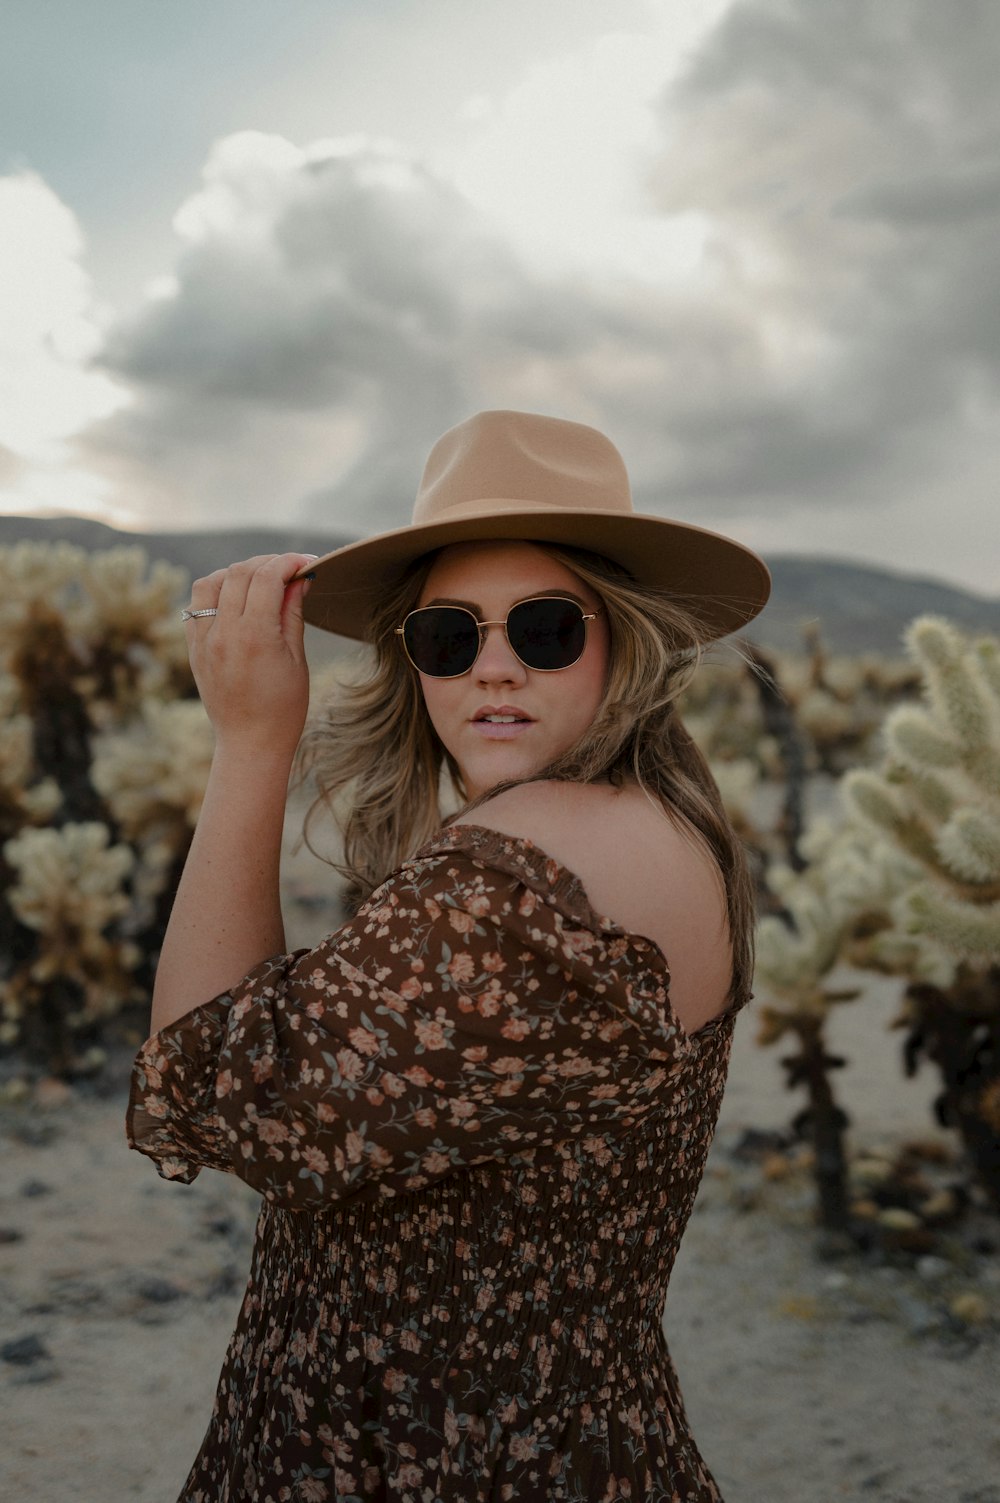 a woman wearing a hat and sunglasses in a desert